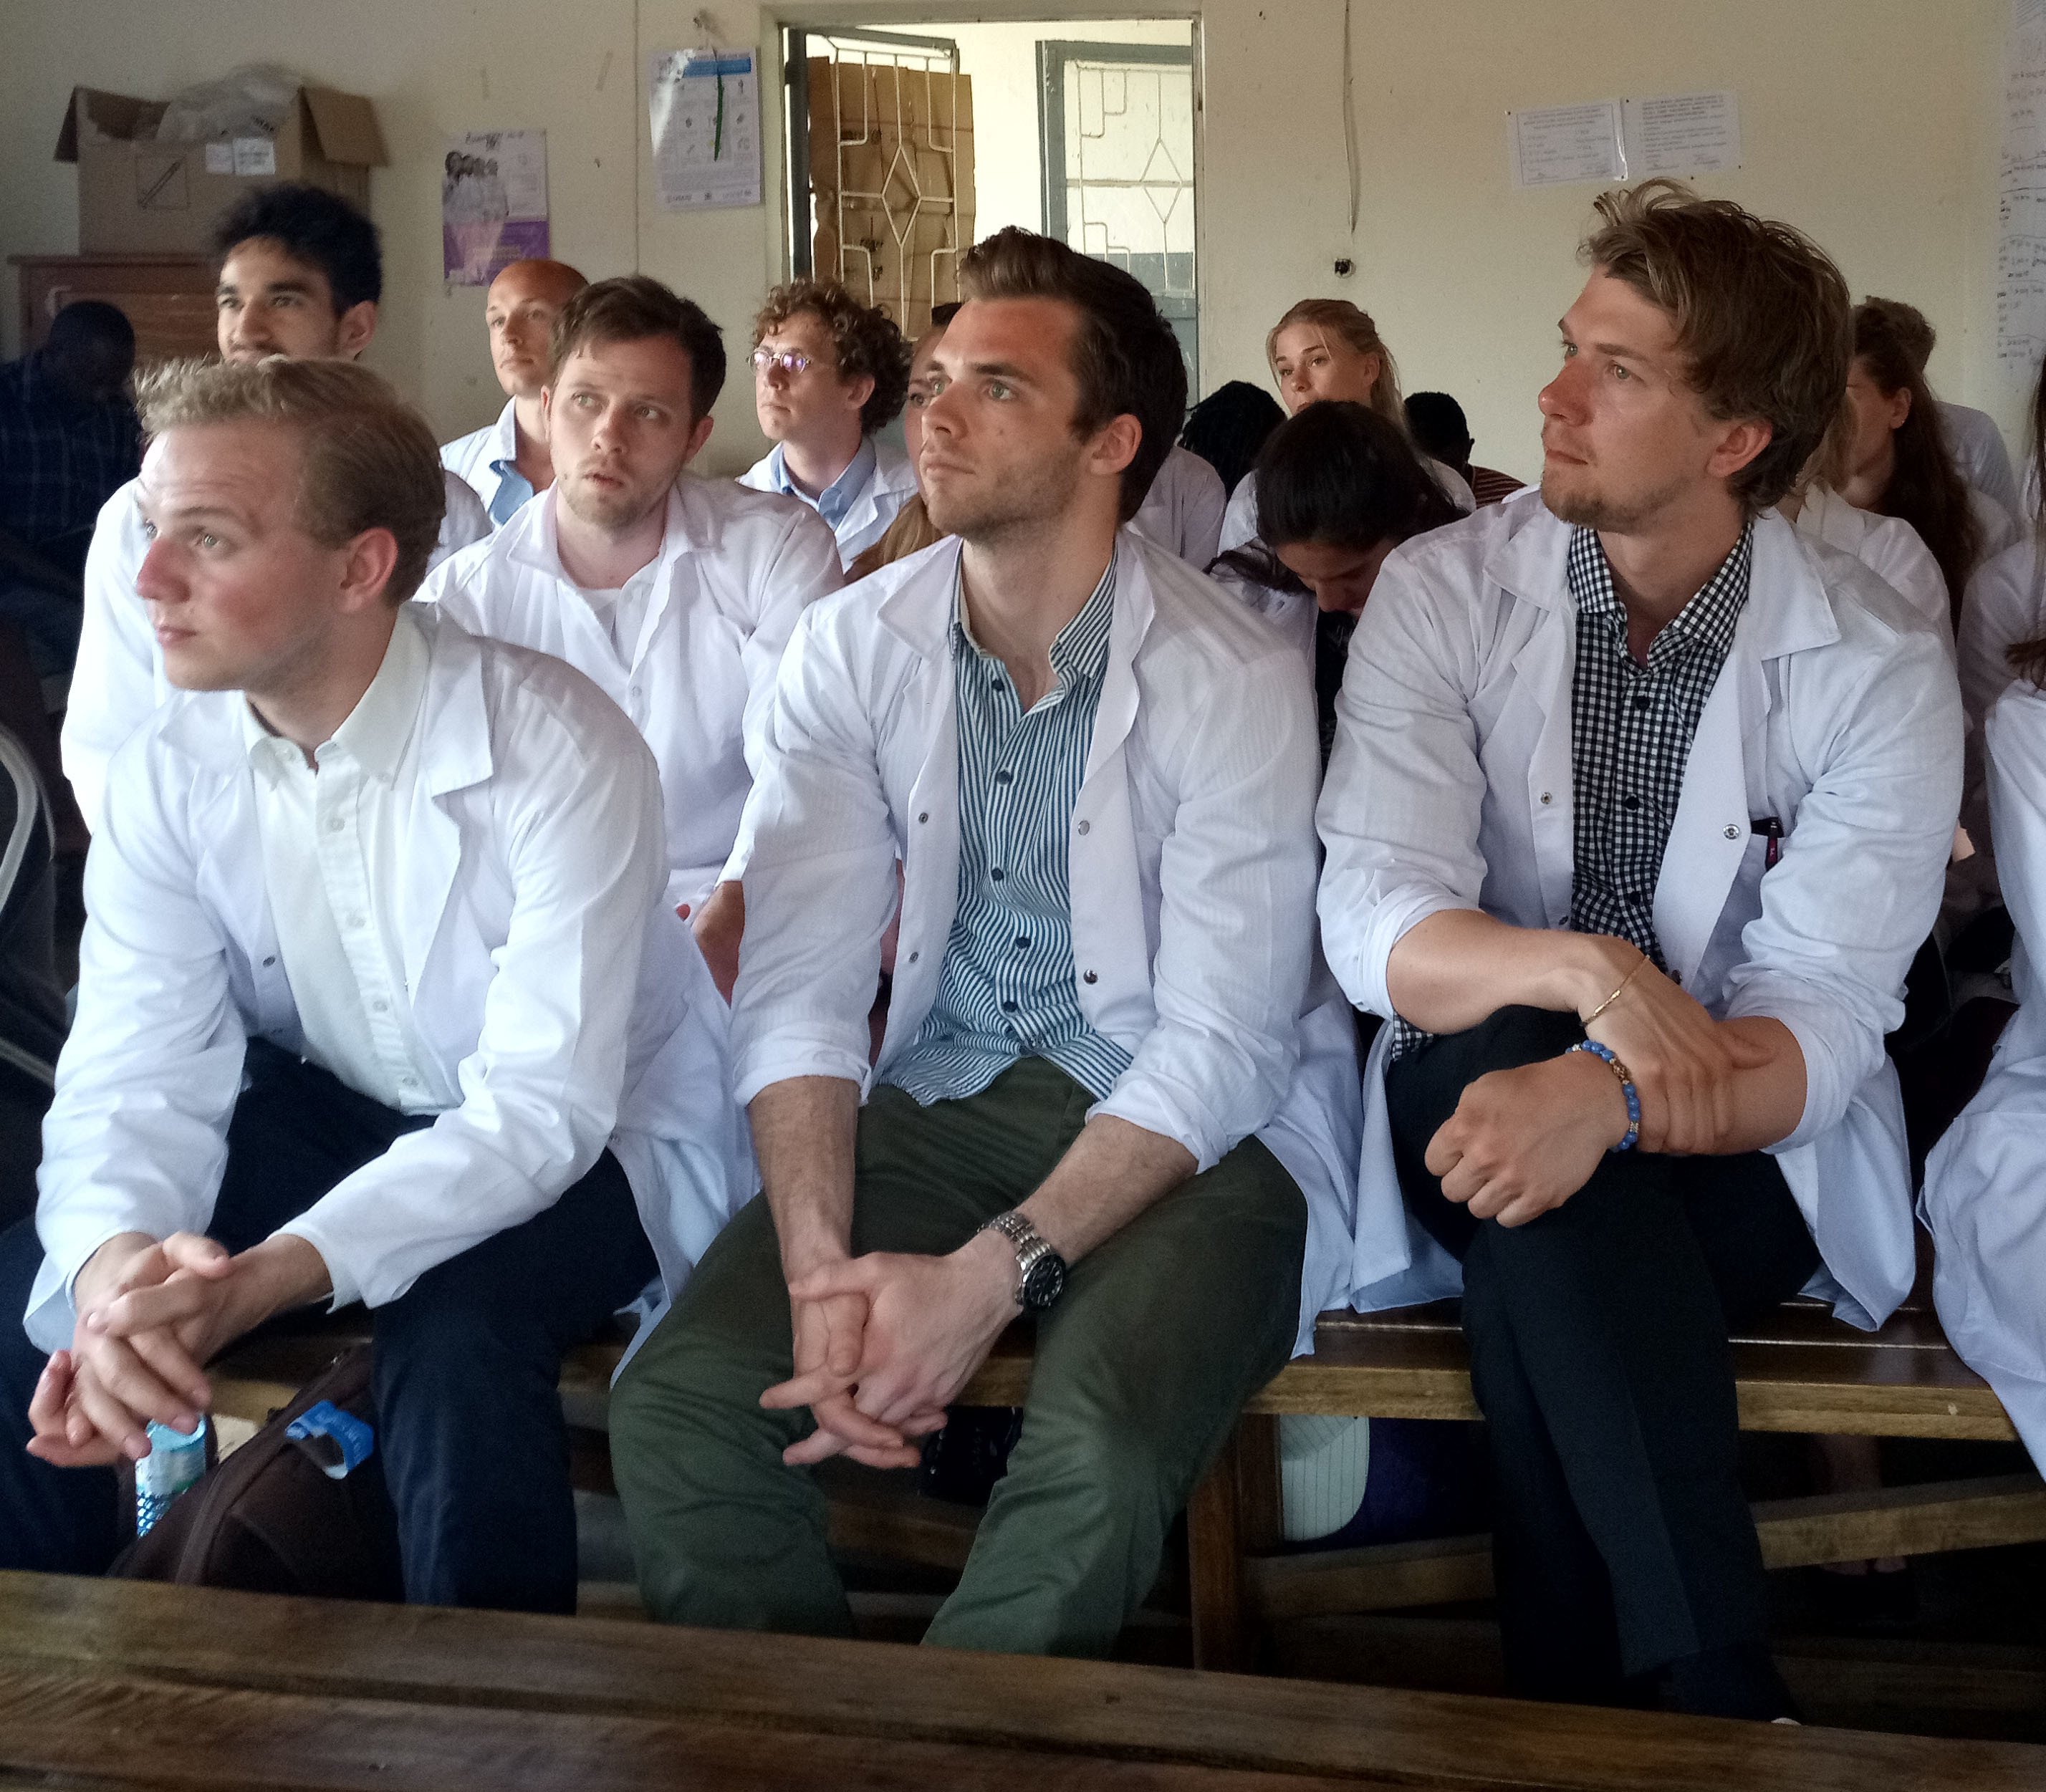 Students in white lab coats sitting on several rows listening attentively.